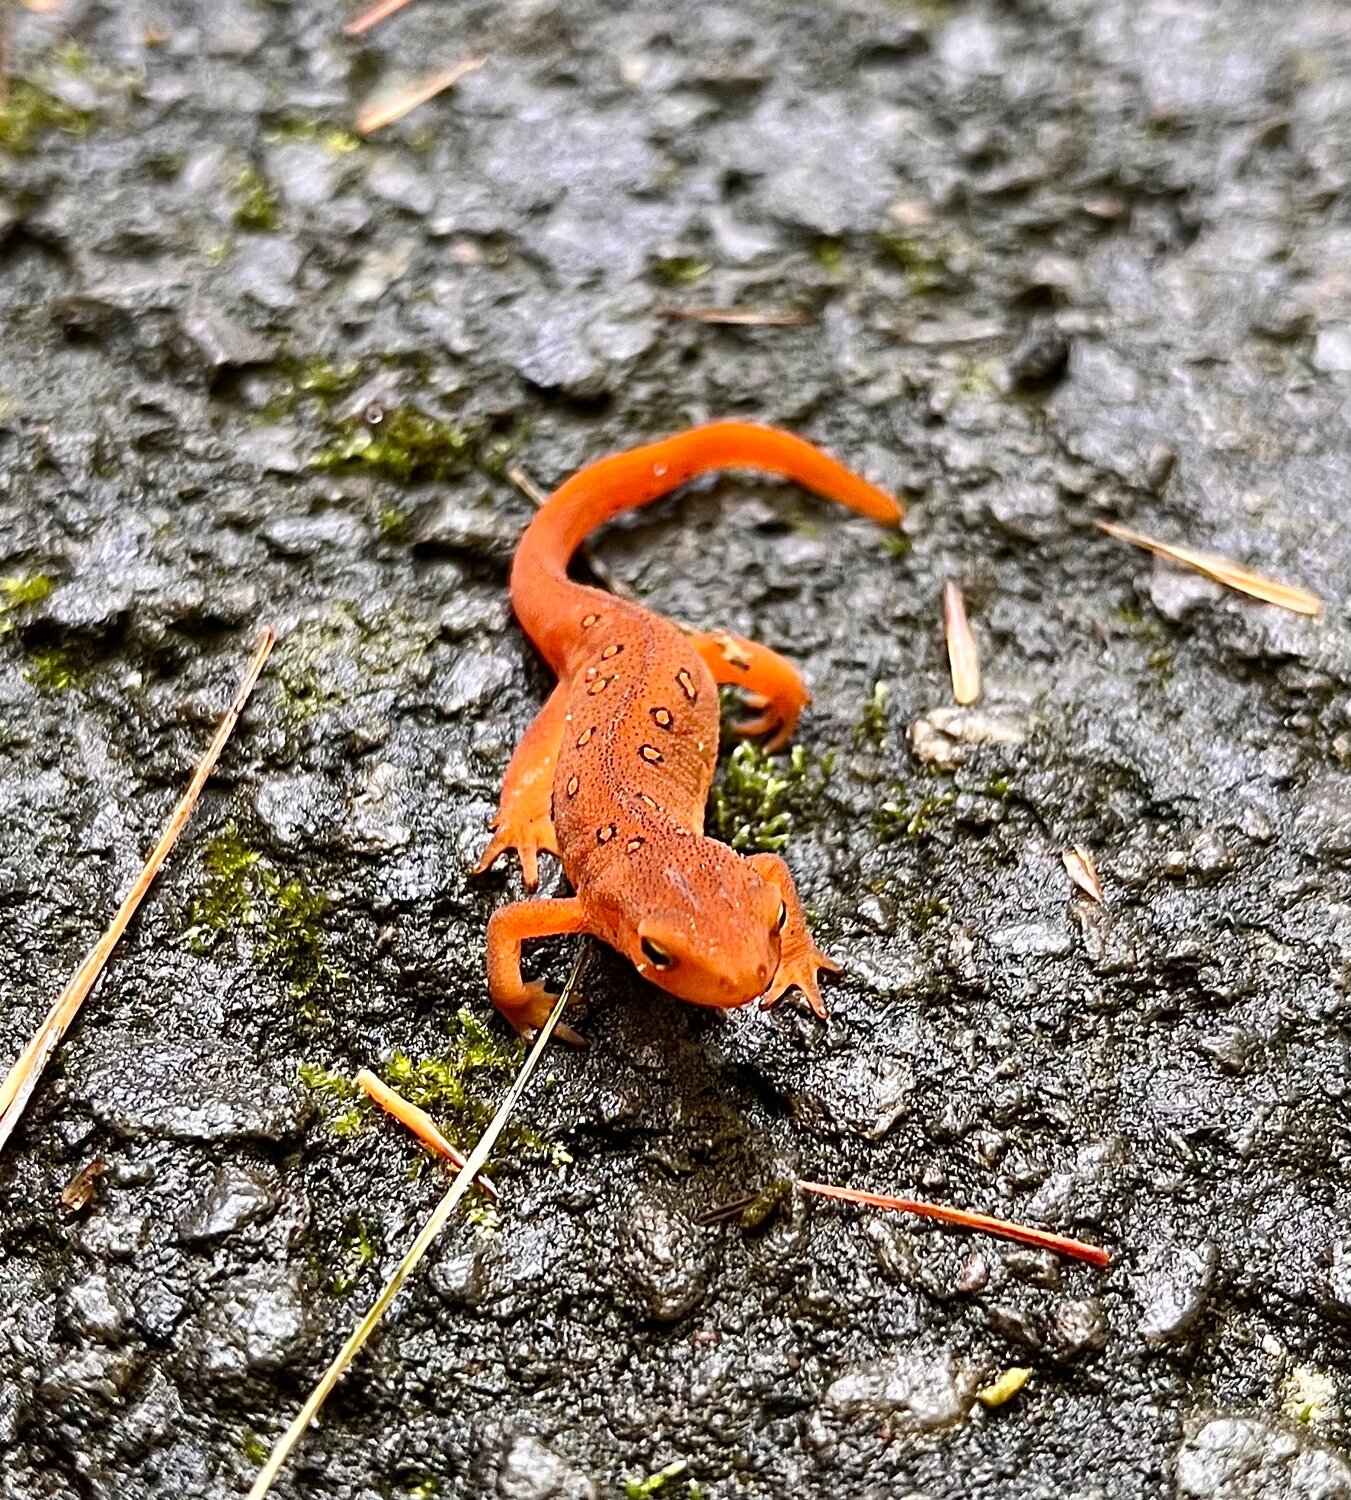 I’ve been drawn to red efts since childhood because they’re adorable (IMHO) but I never knew much about them.